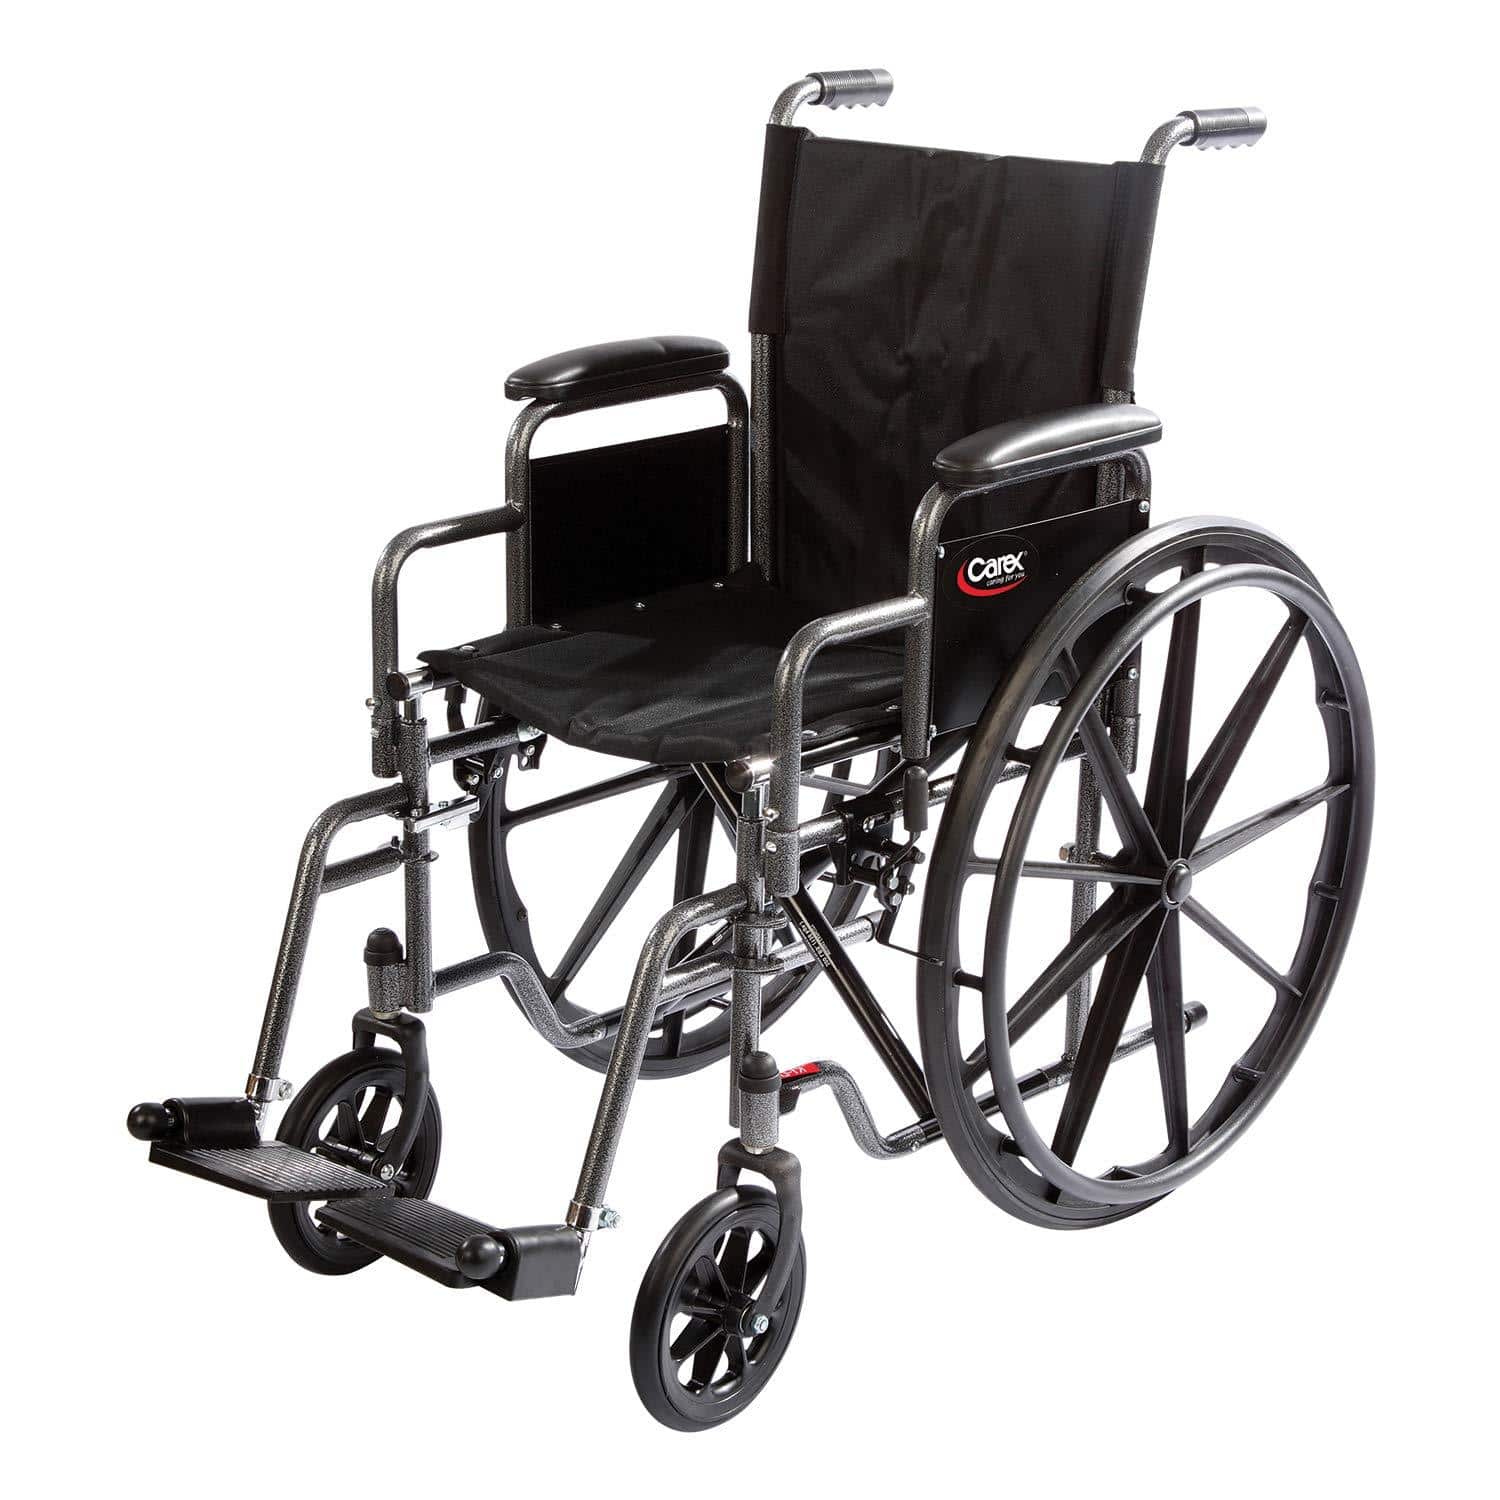 Carex Wheelchair with Large 18” Padded Seat - Wheel Chair with Adjustable  and Removable Swing-Away Footrests - Folding Chair for Compact Storage